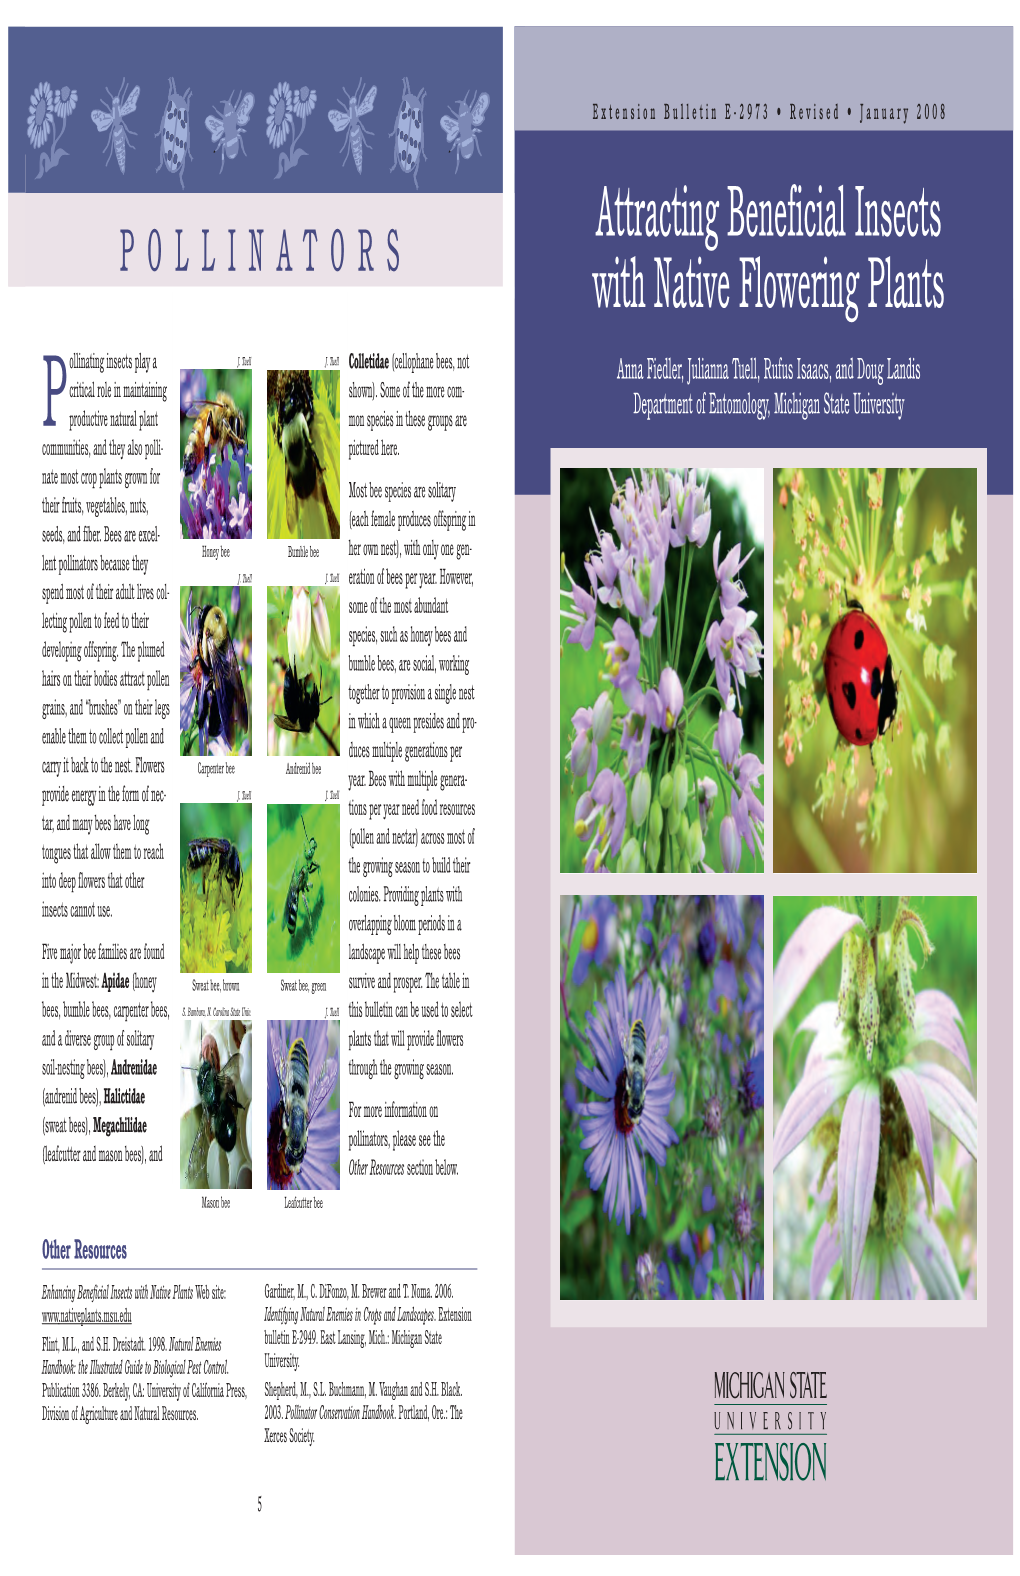 Attracting Beneficial Insects with Native Flowering Plants